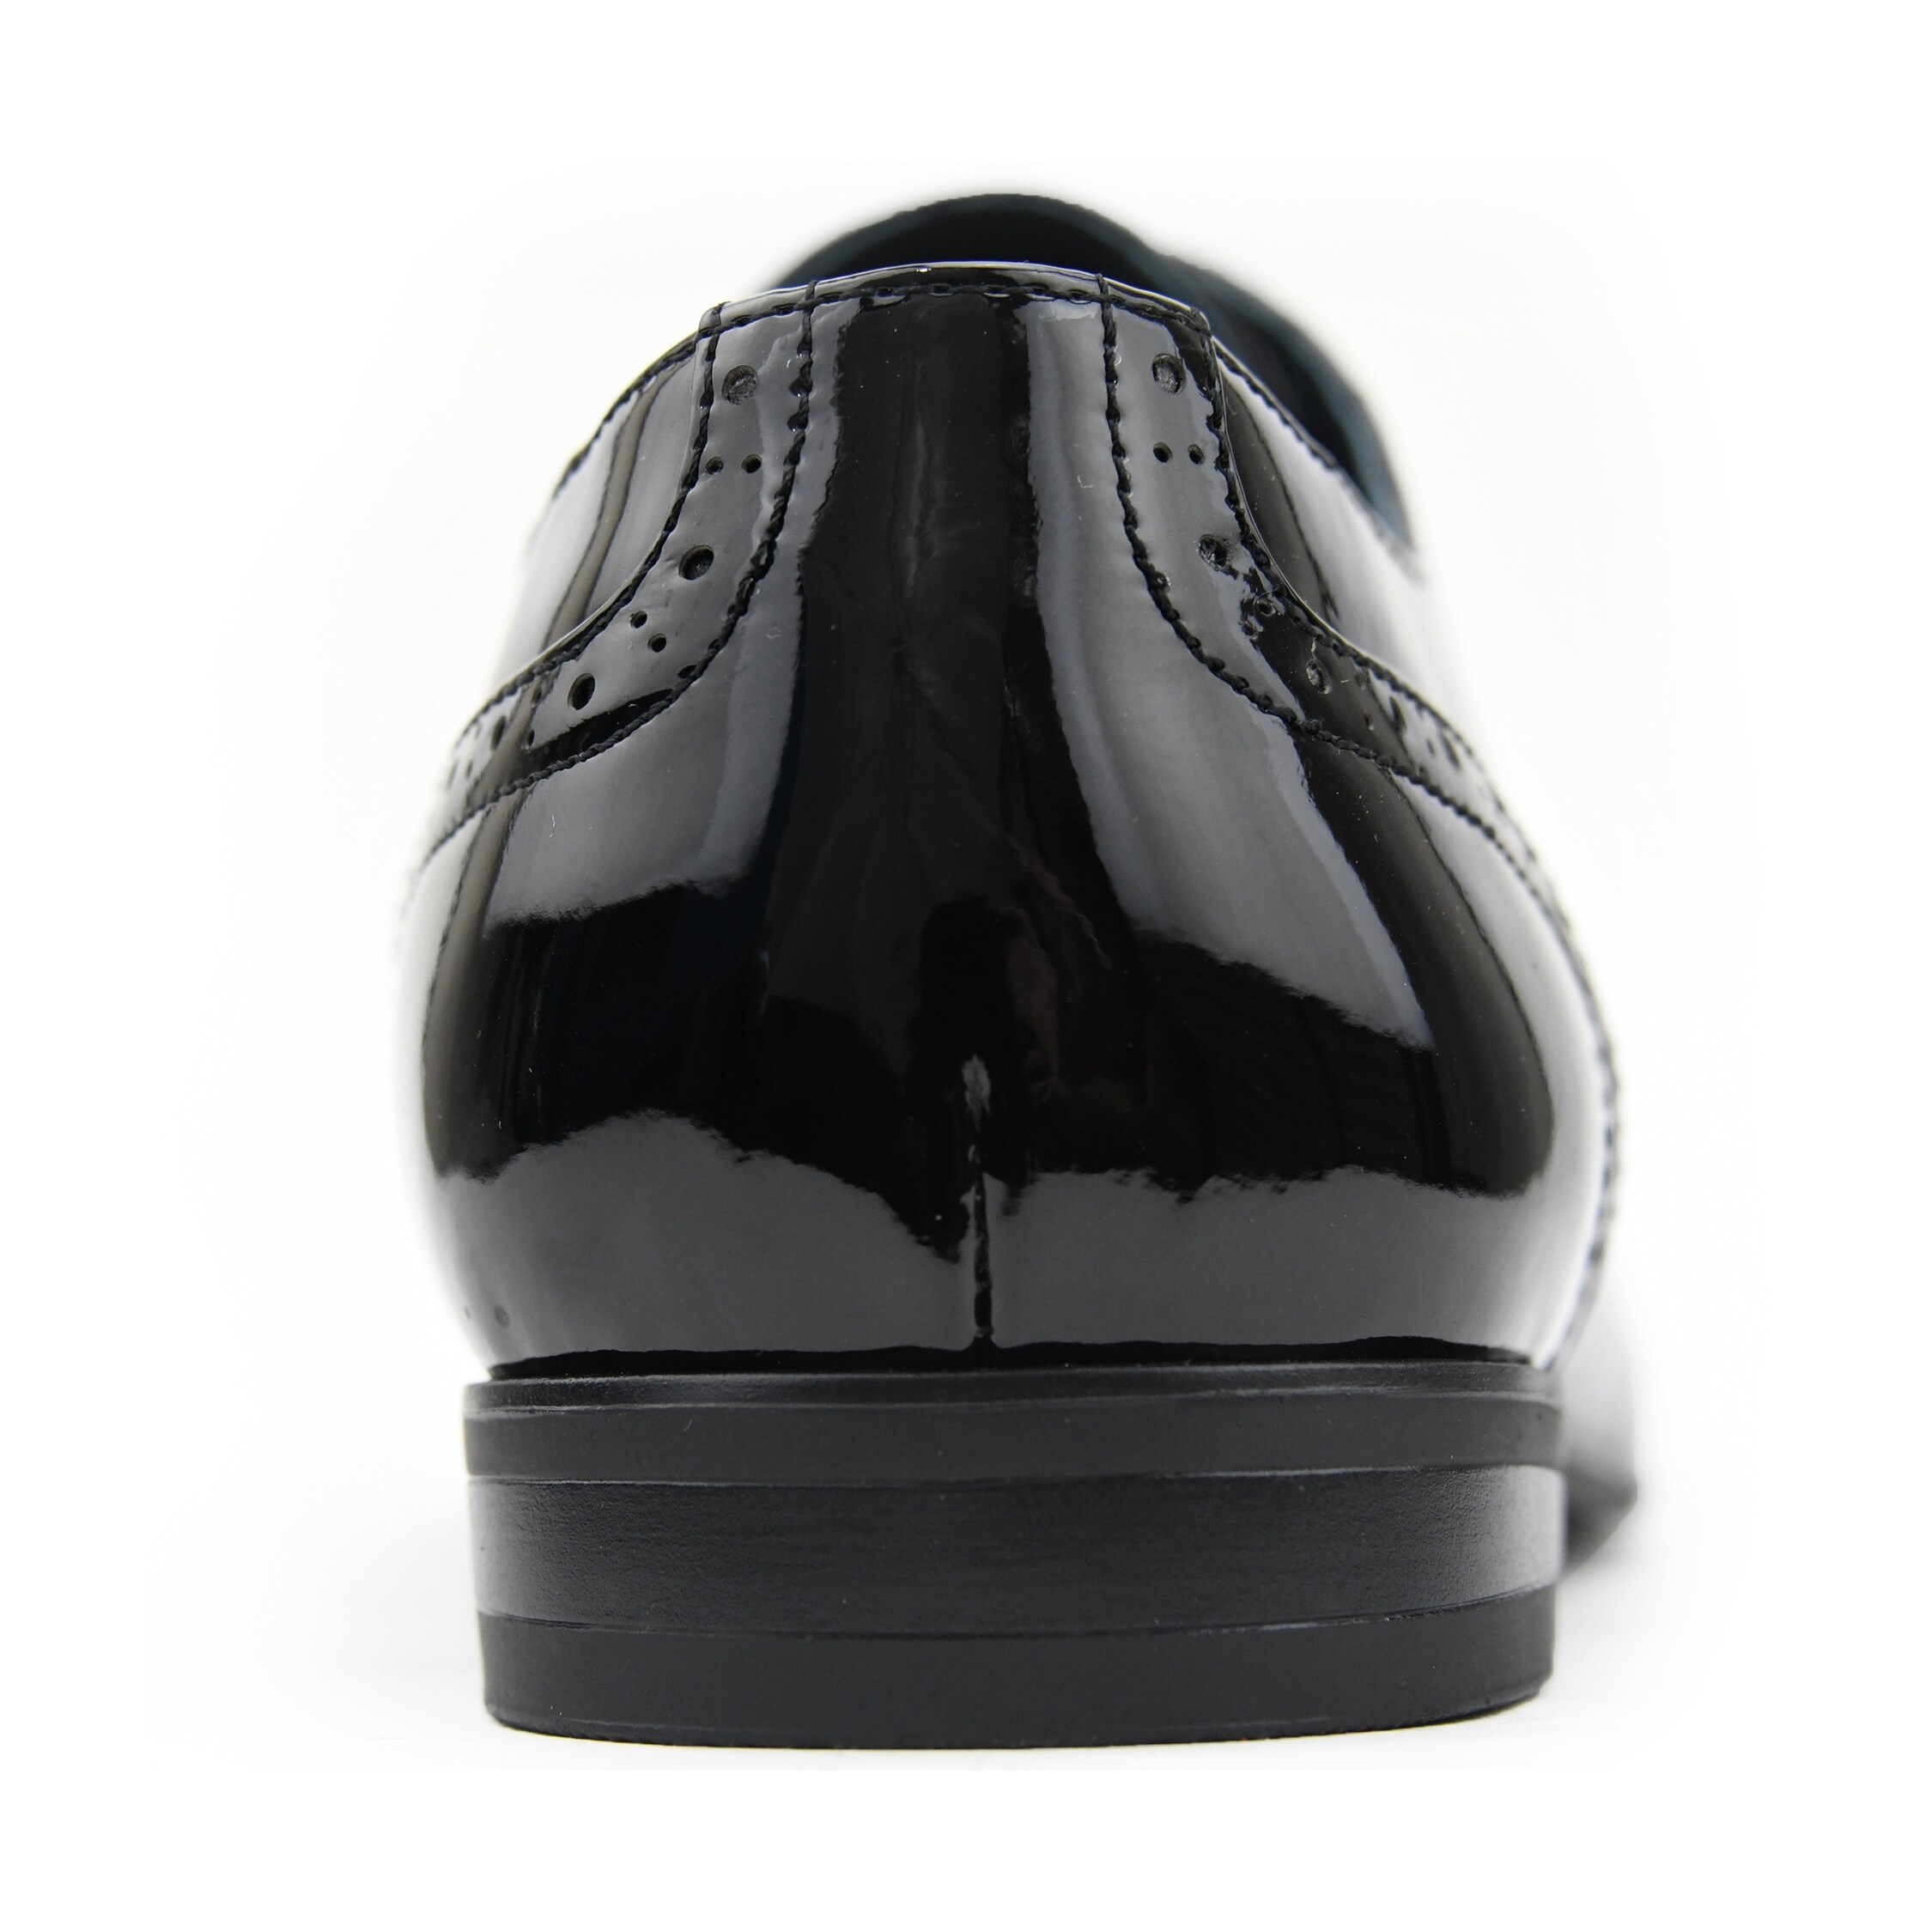 skate shoes that look like dress shoes